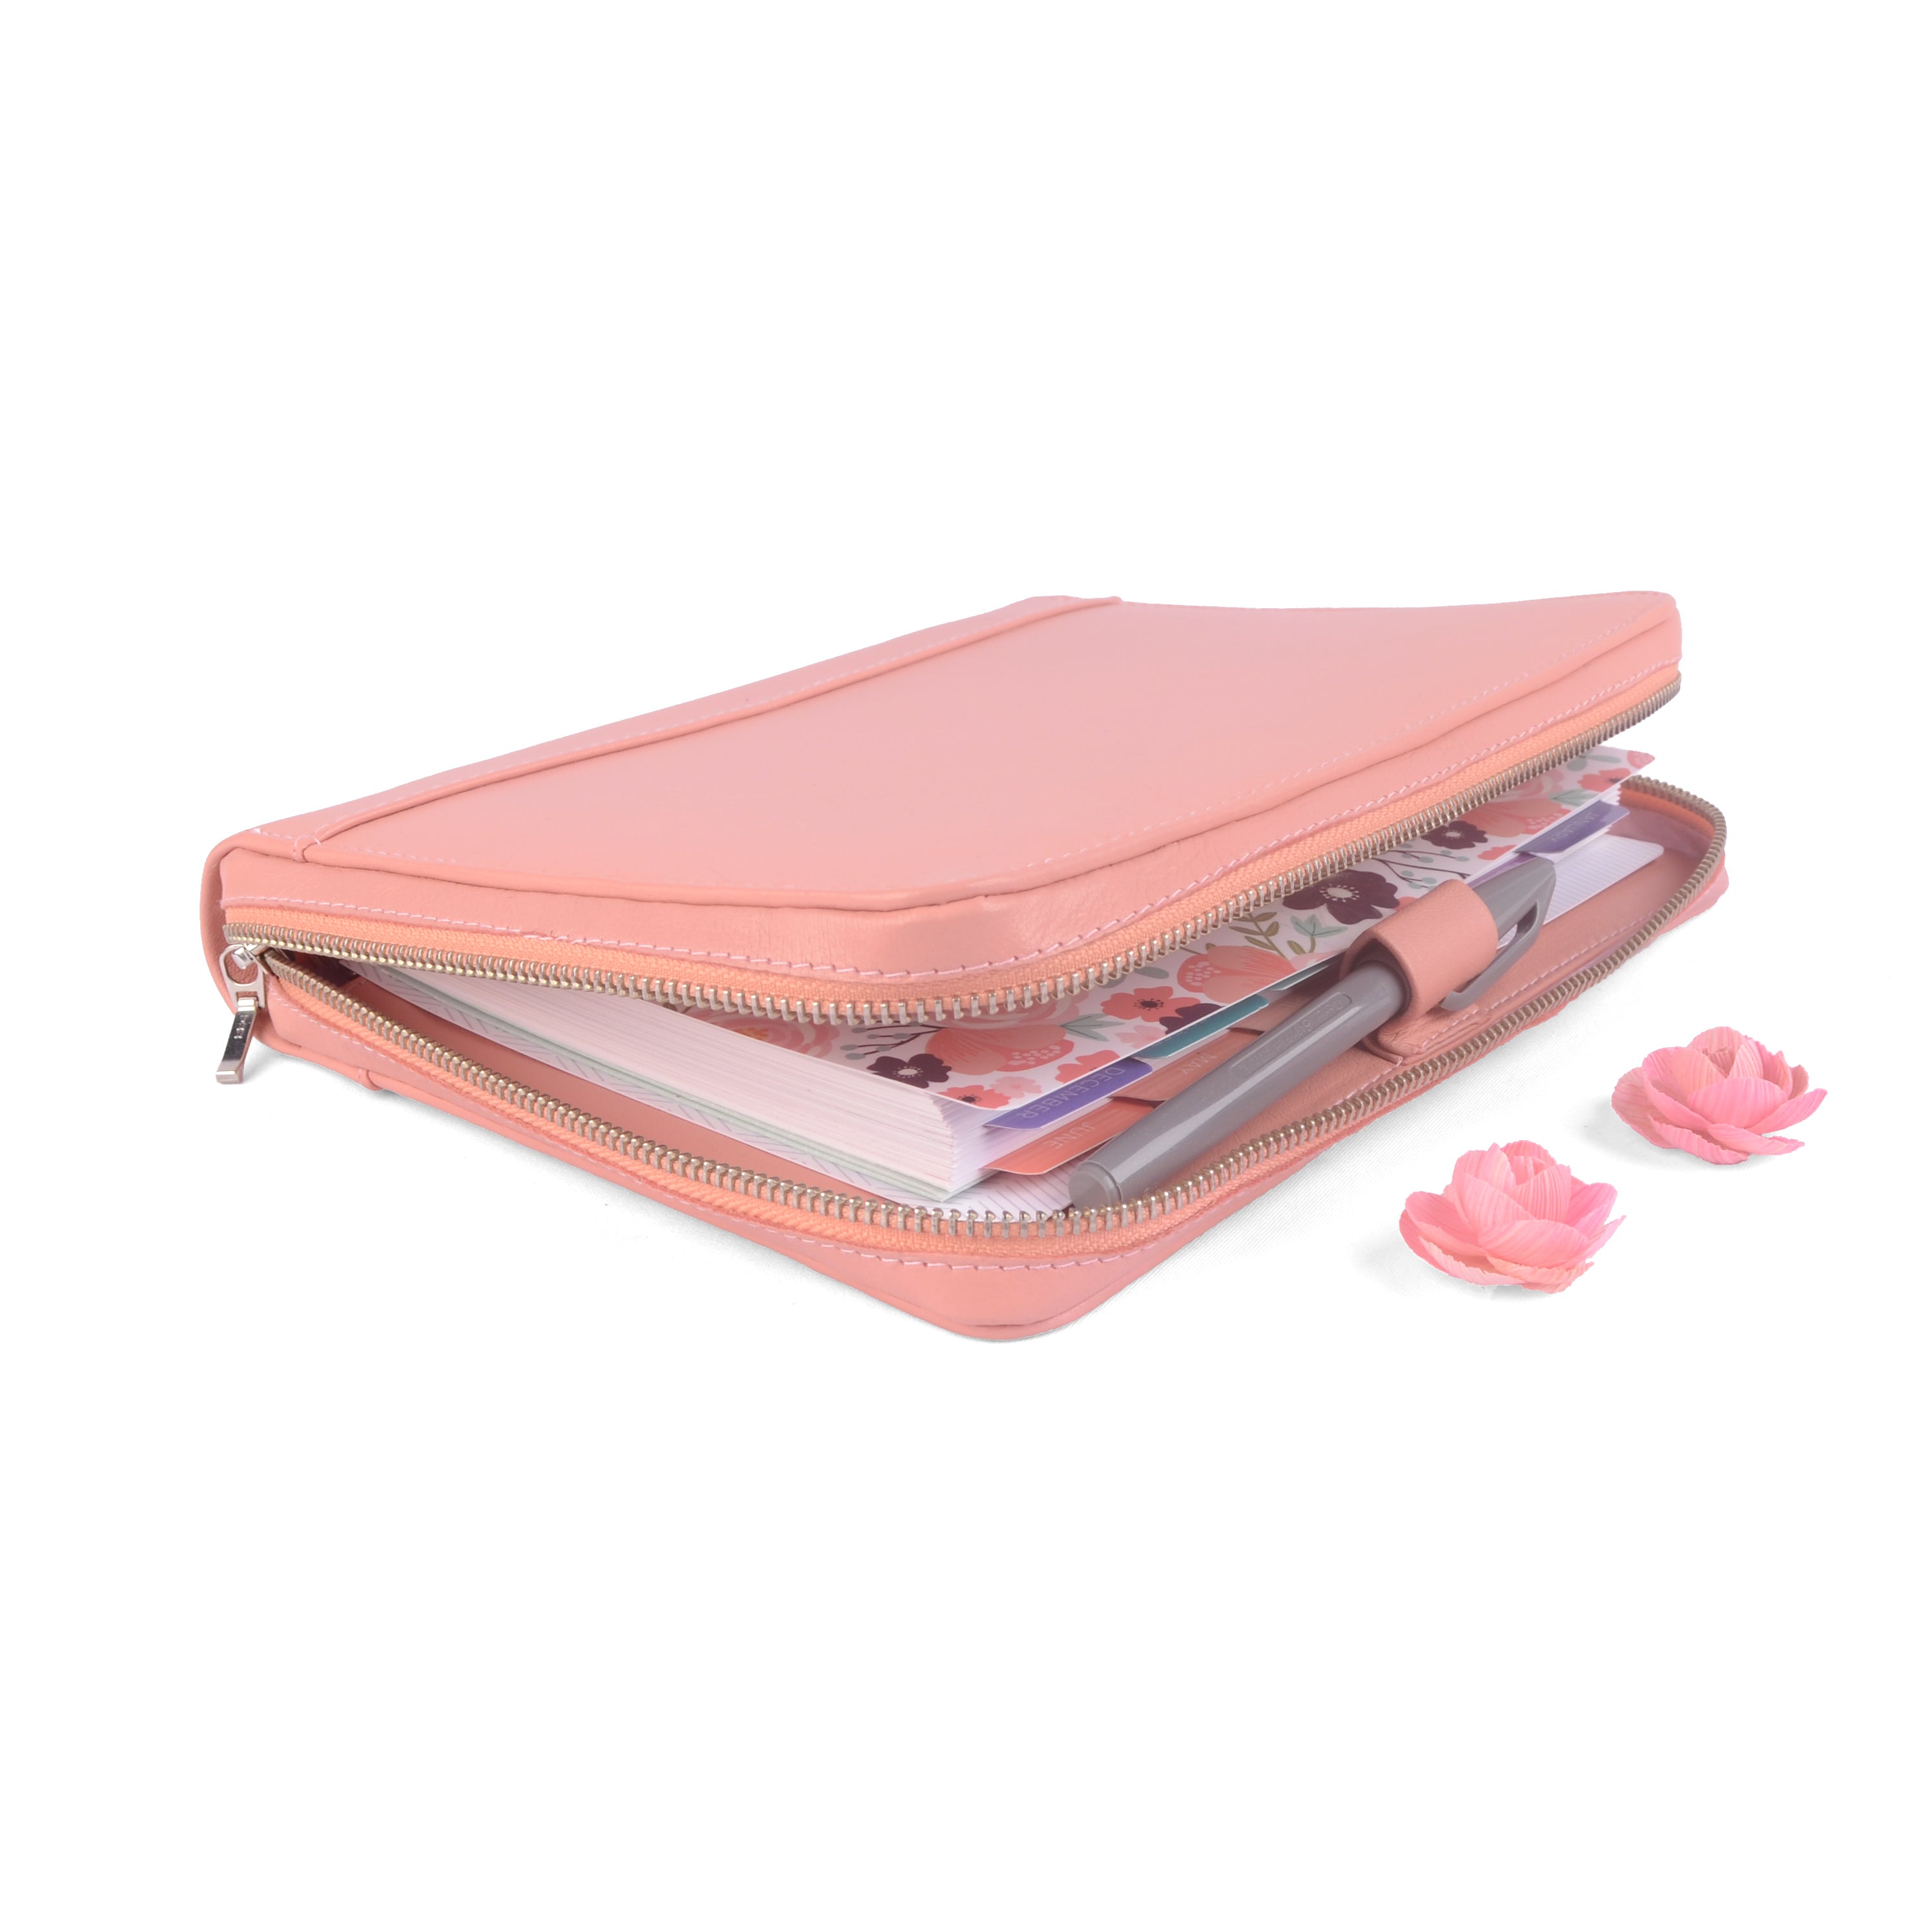 BELLA Zippered A5 / Half Size Planner Cover for Coil Bound 